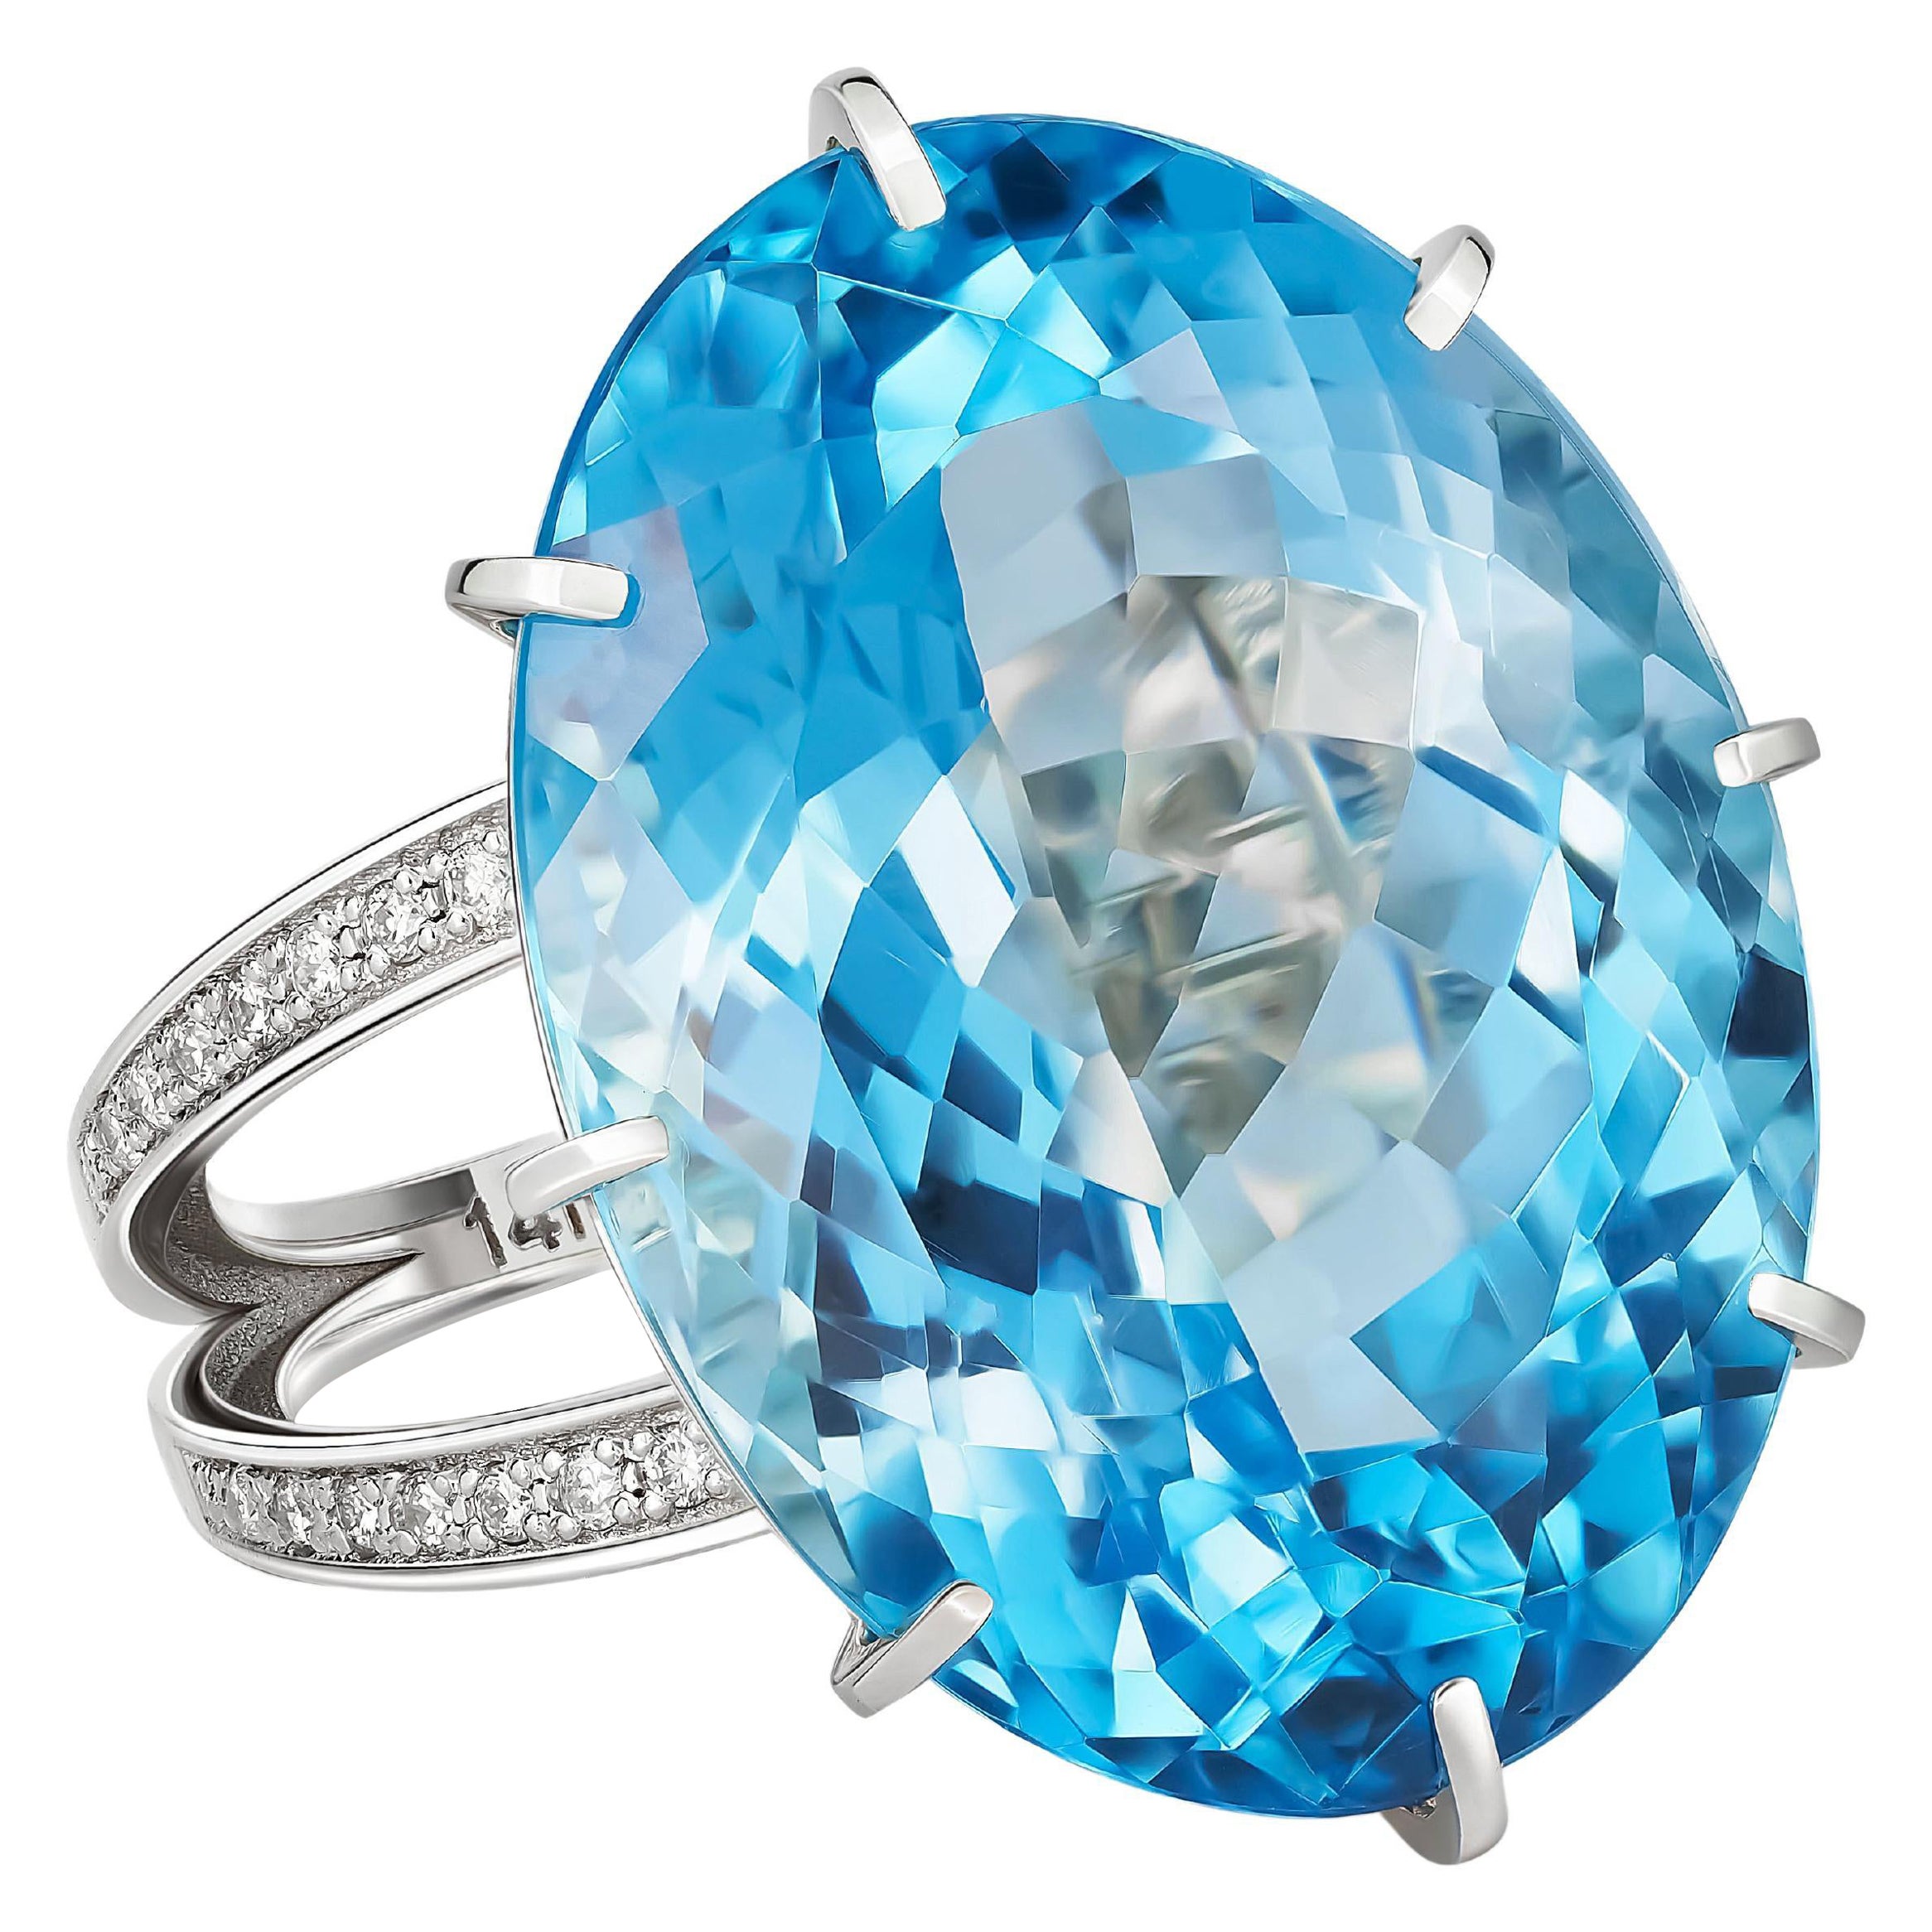 Massive ring with topaz and diamonds
14 ct gold
Weight: 10.1 g.
Set with topaz , color - blue
Oval cut, apx 26 ct. ( 21.5x15.5x 10.3 mm)
Clarity: Transparent with inclusions
Other stones:
Diamonds - round brilliant cut, G/VS, 32 x 0.009 ct, 0.28 ct